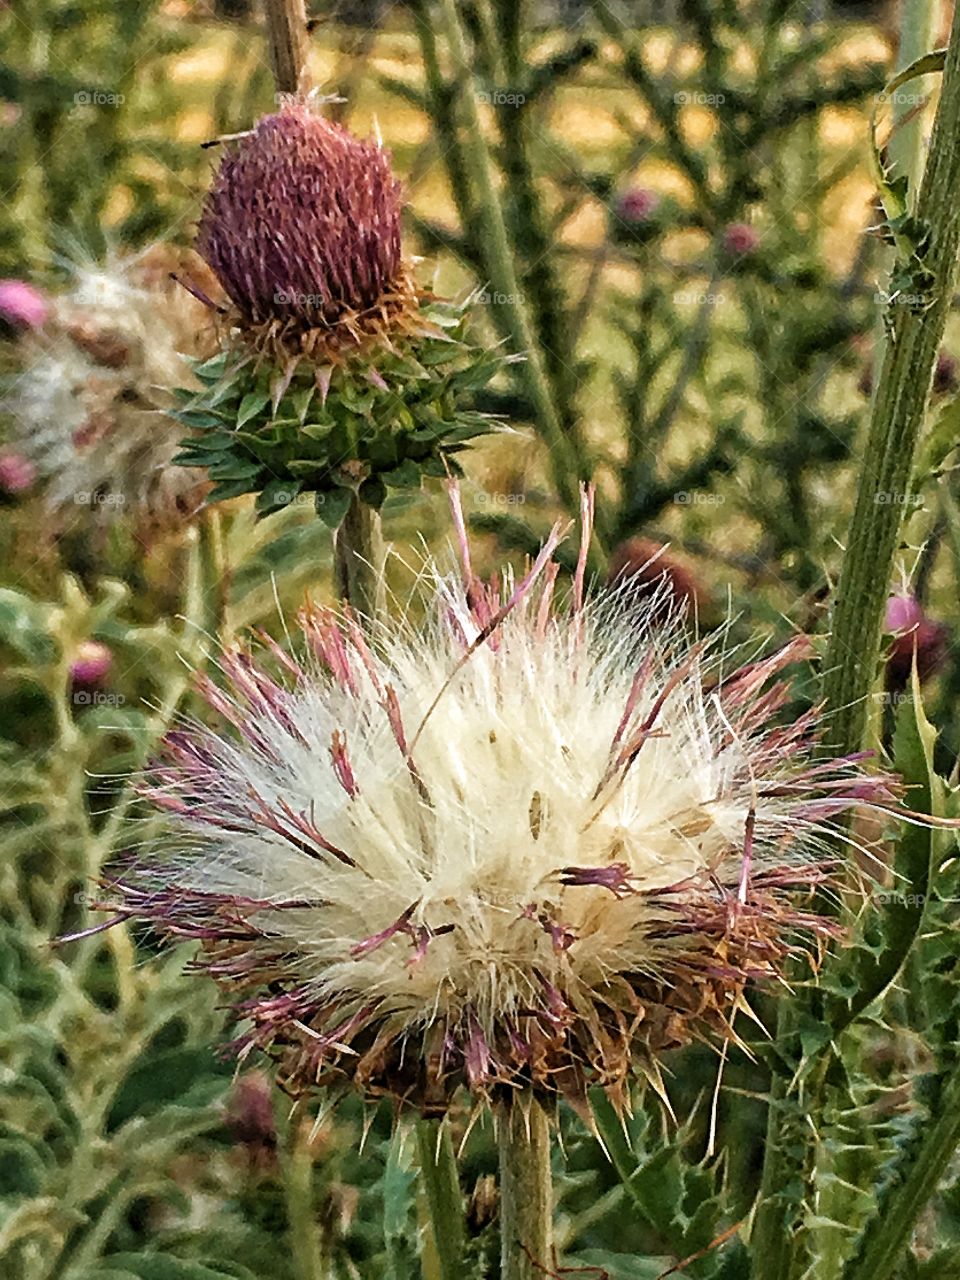 Woolly lobes of Texas Thistle about to blow away as seeds. 